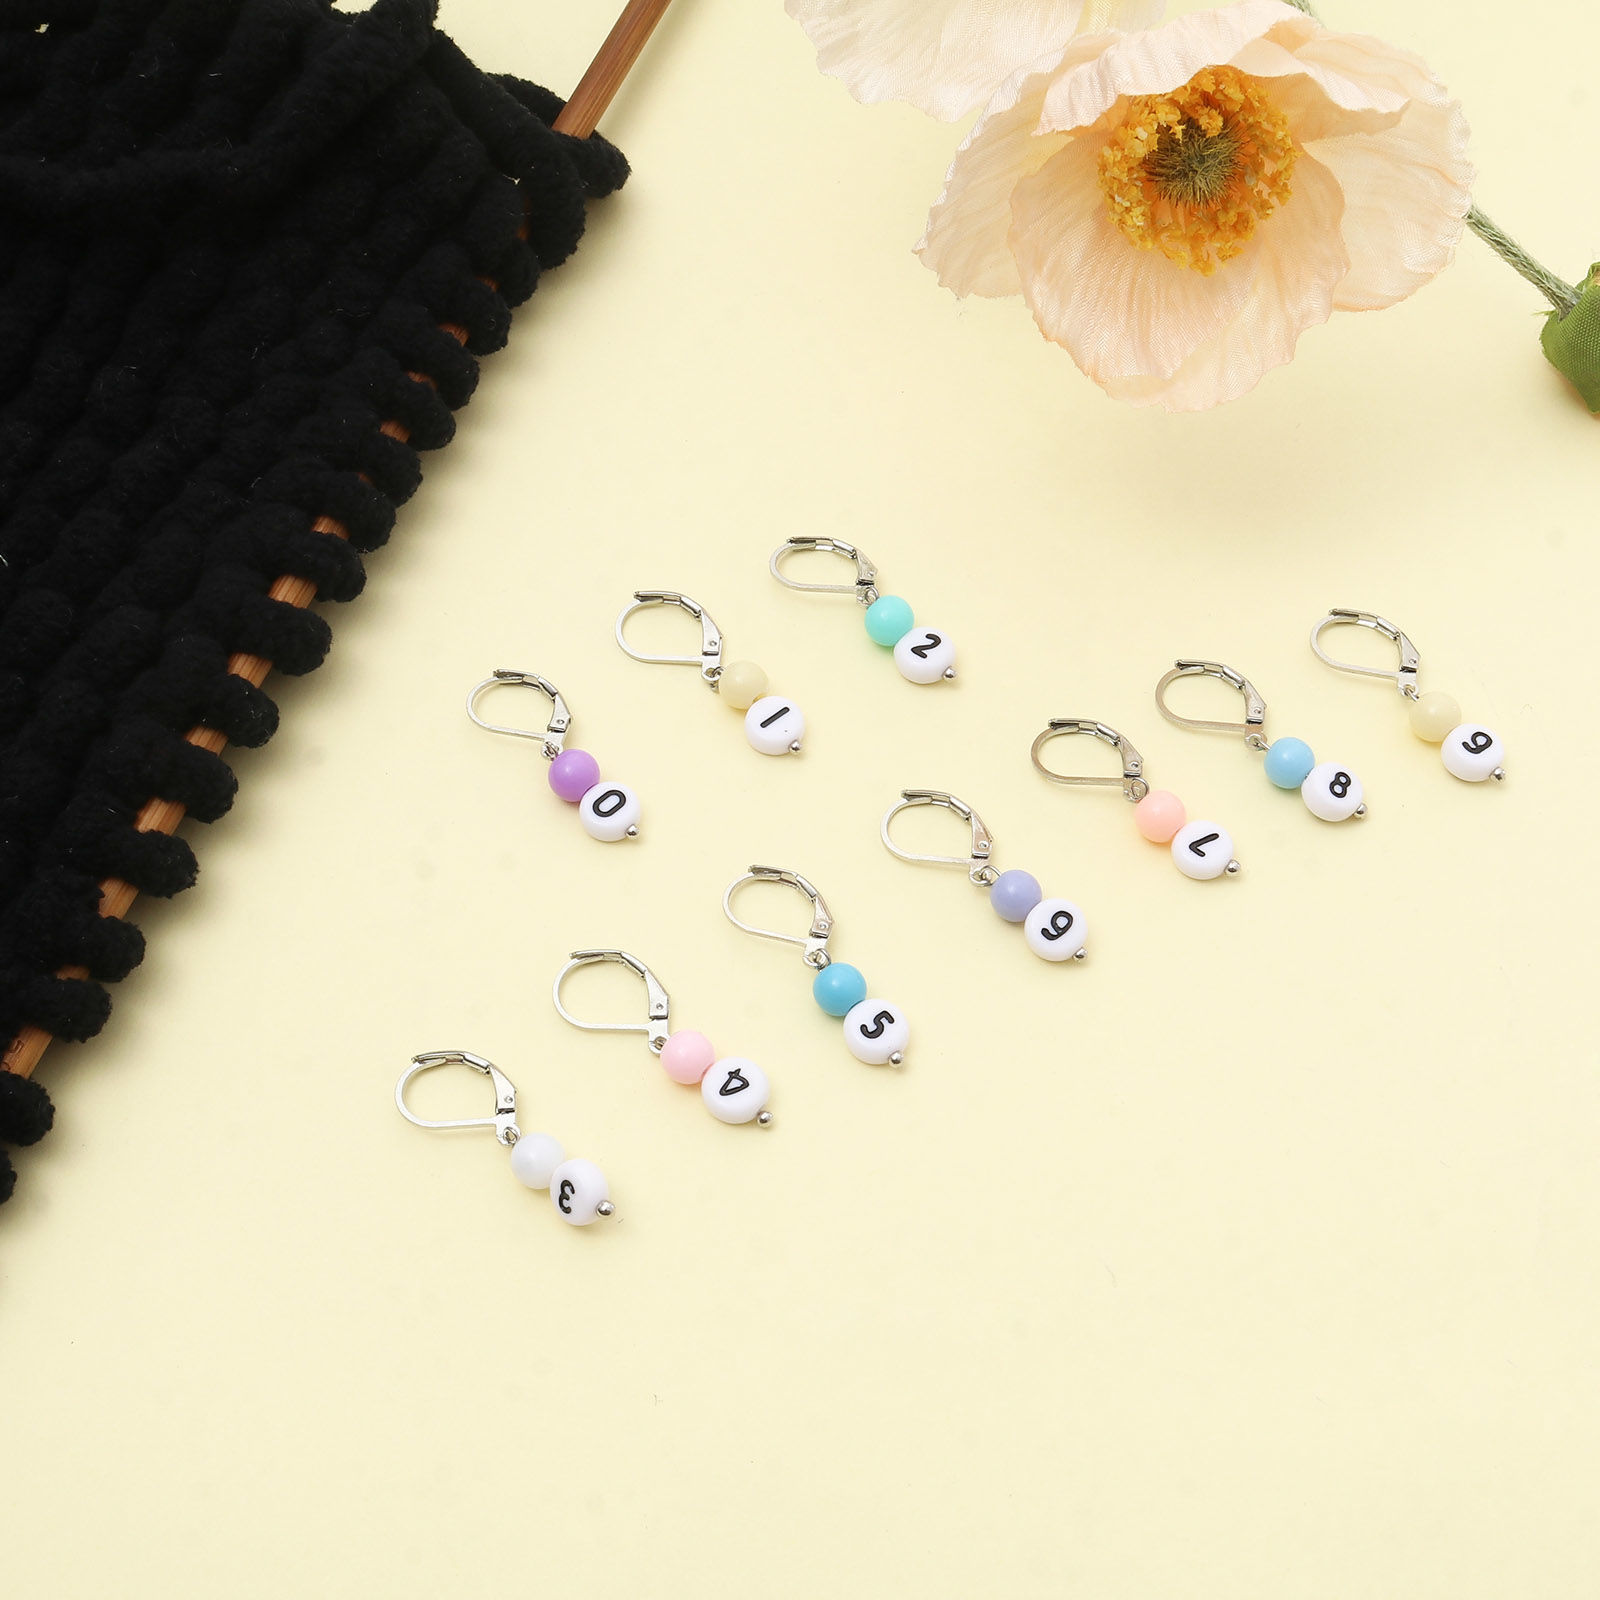 Picture of Copper & Acrylic Knitting Stitch Markers Number 0-9 Silver Tone At Random Color 3.1cm x 1.1cm, 1 Set ( 10 PCs/Set)